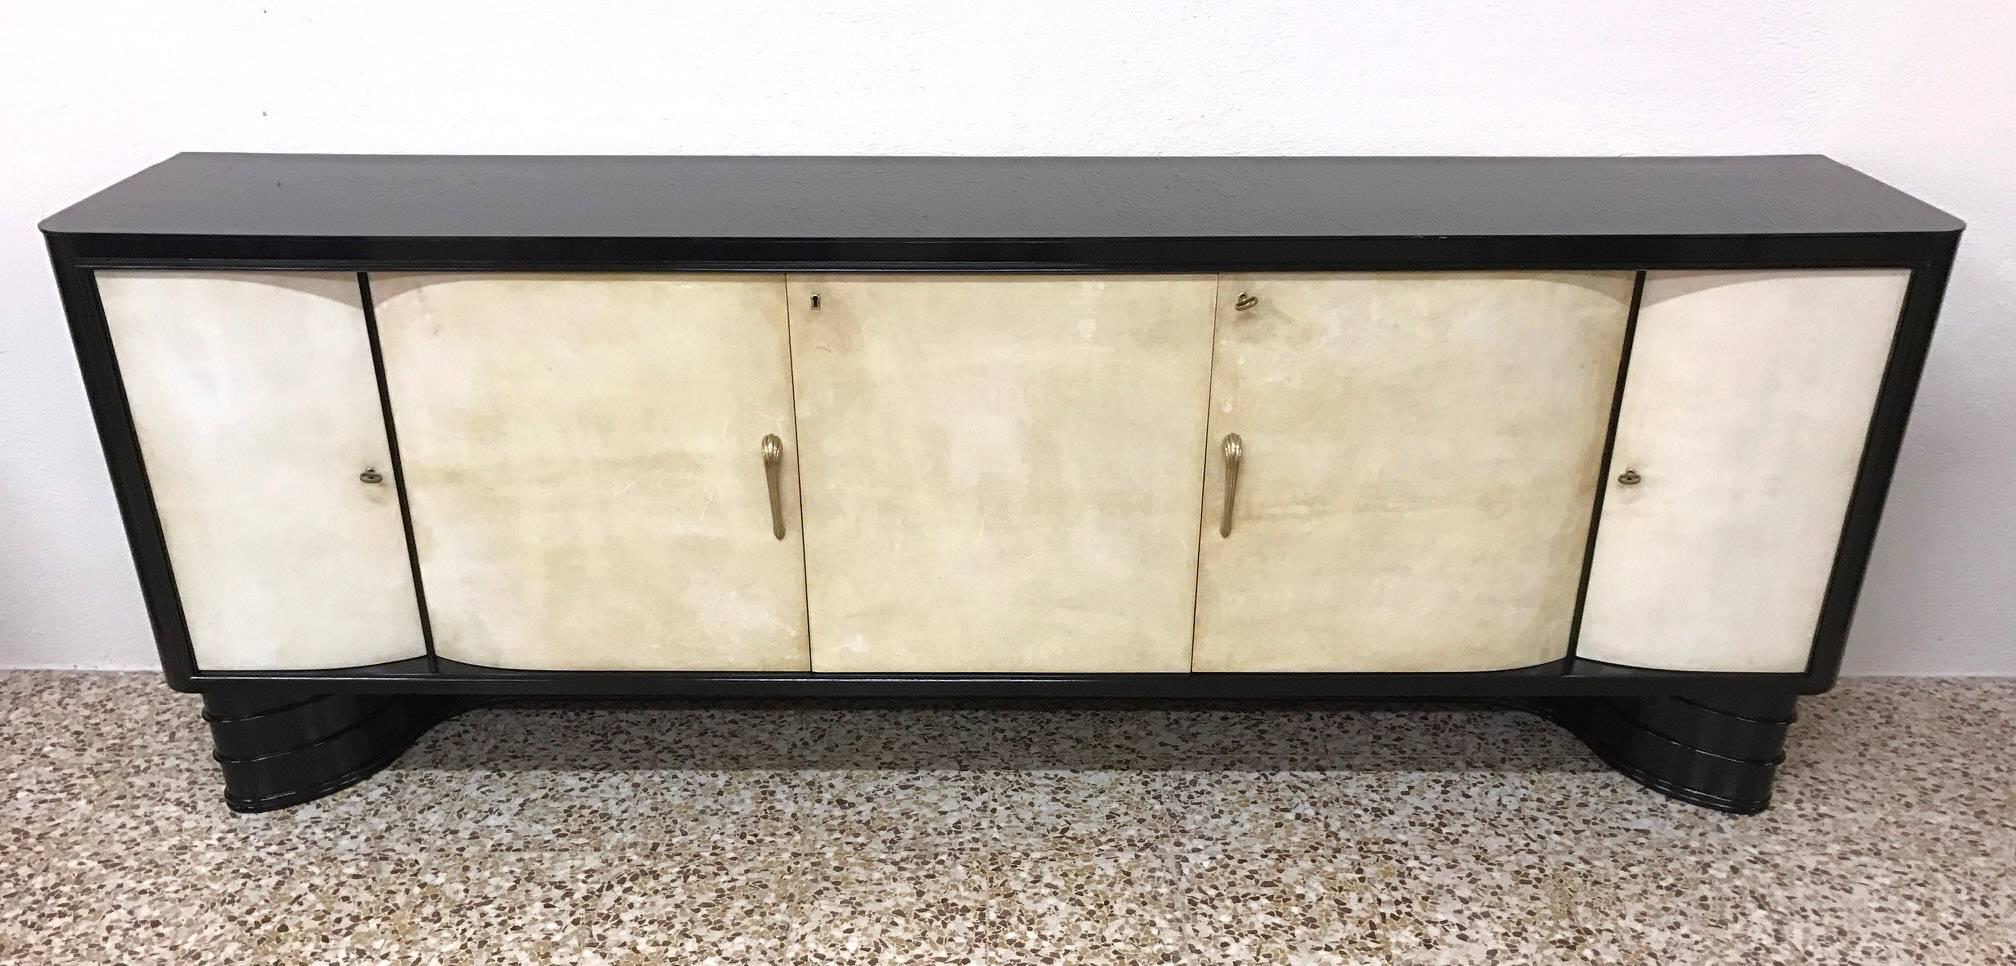 A great 1940s sideboard with parchment doors, black lacquered structure, shelves and drawers on the inside and a black glass on the top. On one door there is the brand ‘Esposizione permanente mobili Cantù’.
The sideboard is in perfect